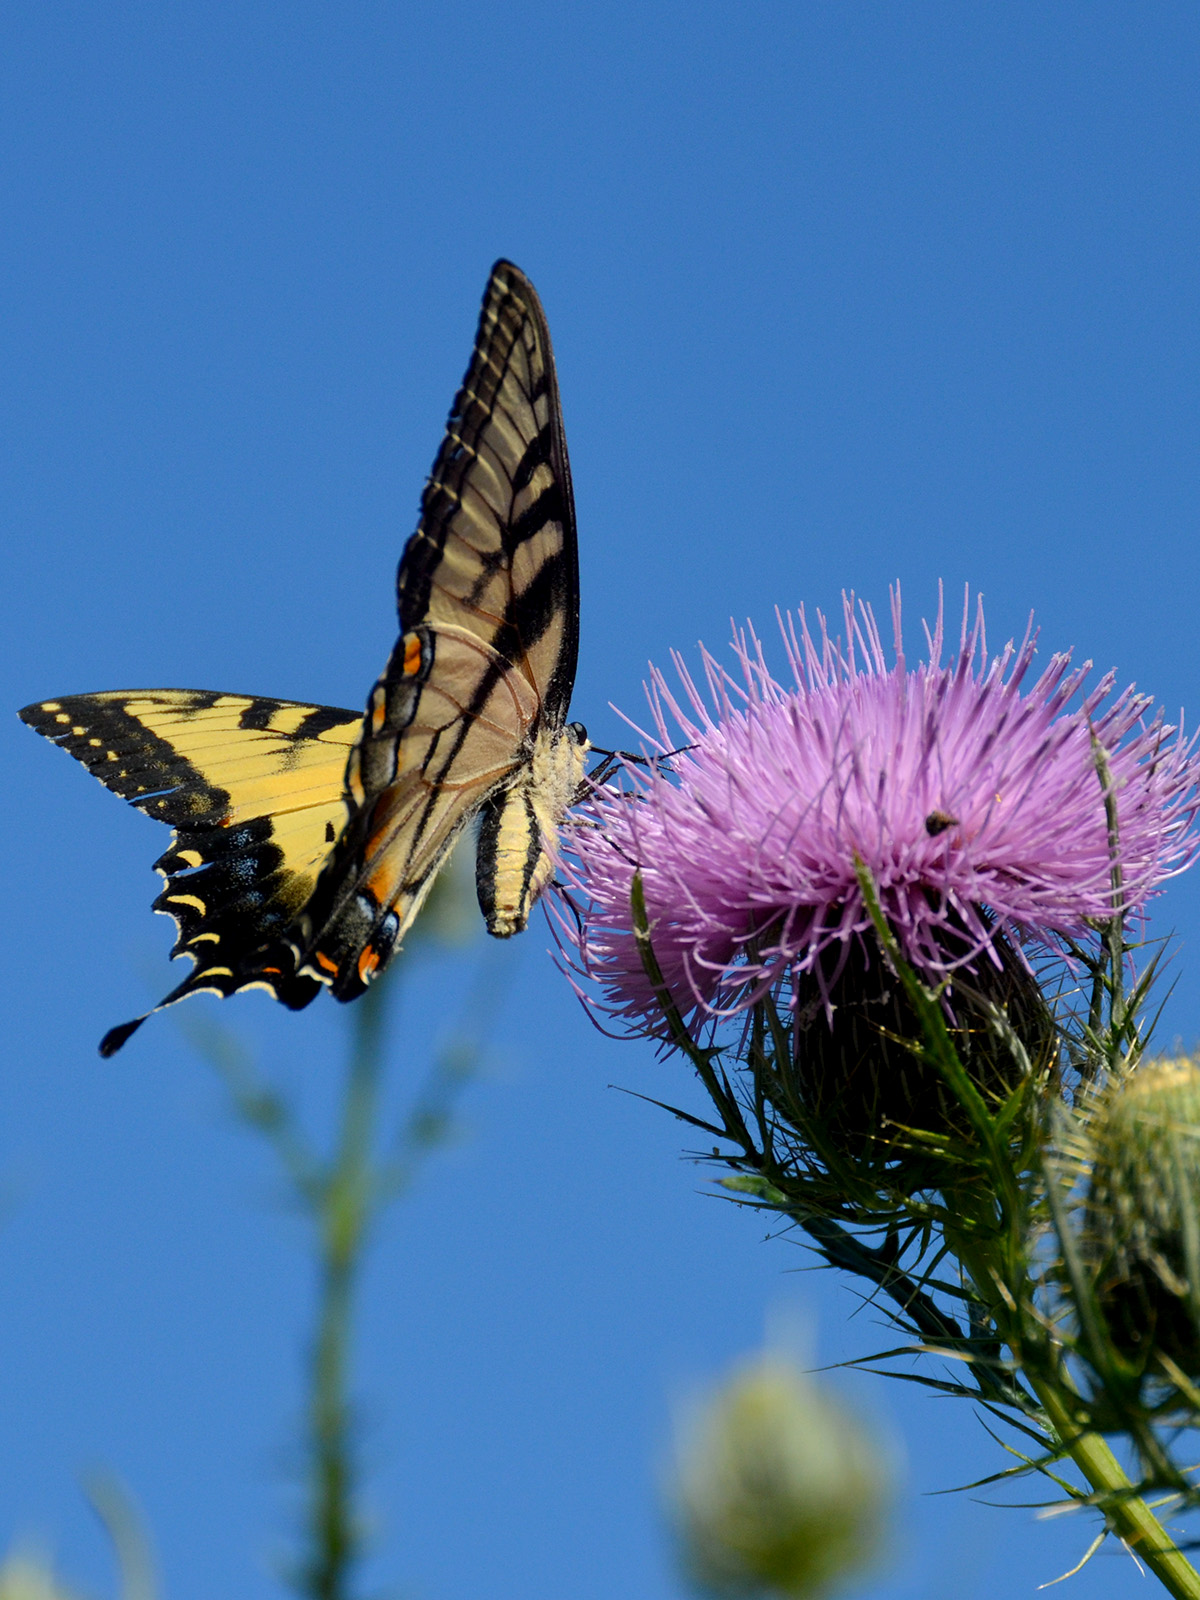 Tiger swallowtail nectaring on a thistle